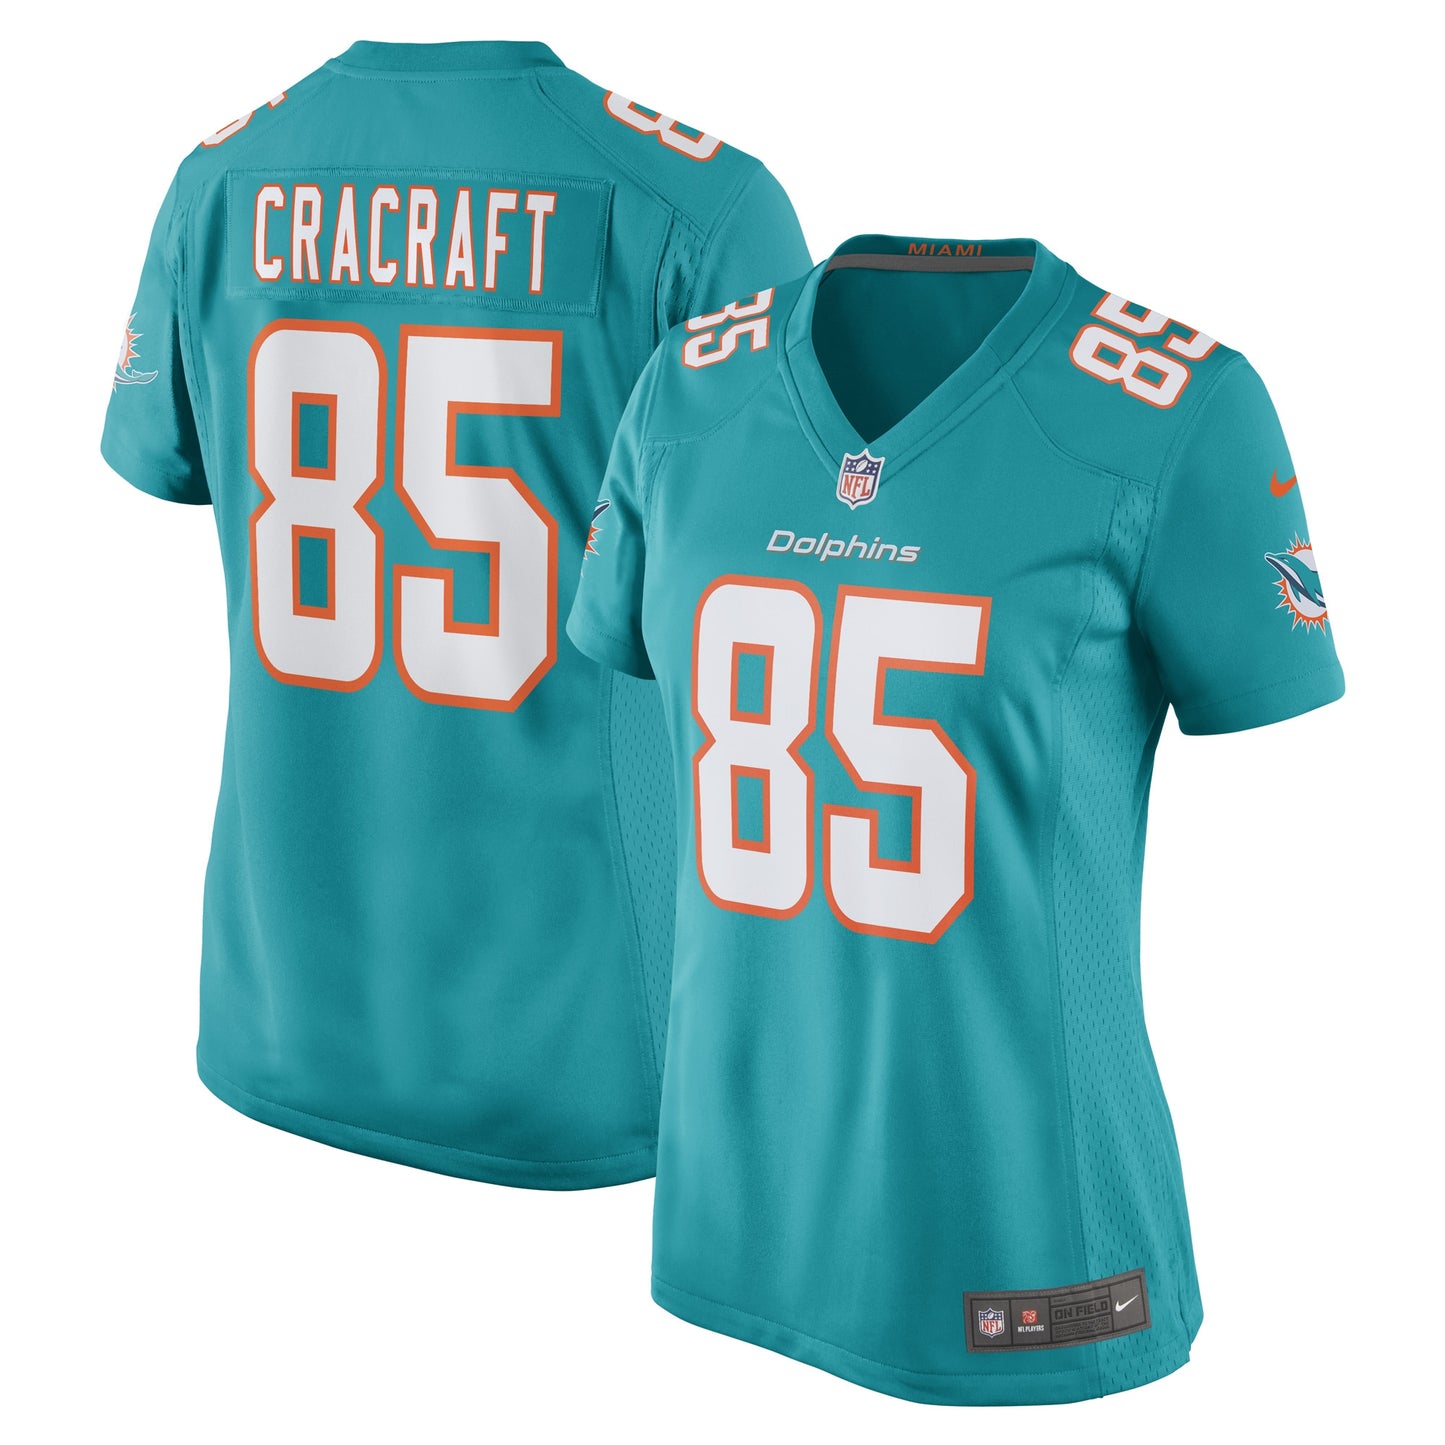 River Cracraft Miami Dolphins Nike Women's Game Player Jersey - Aqua